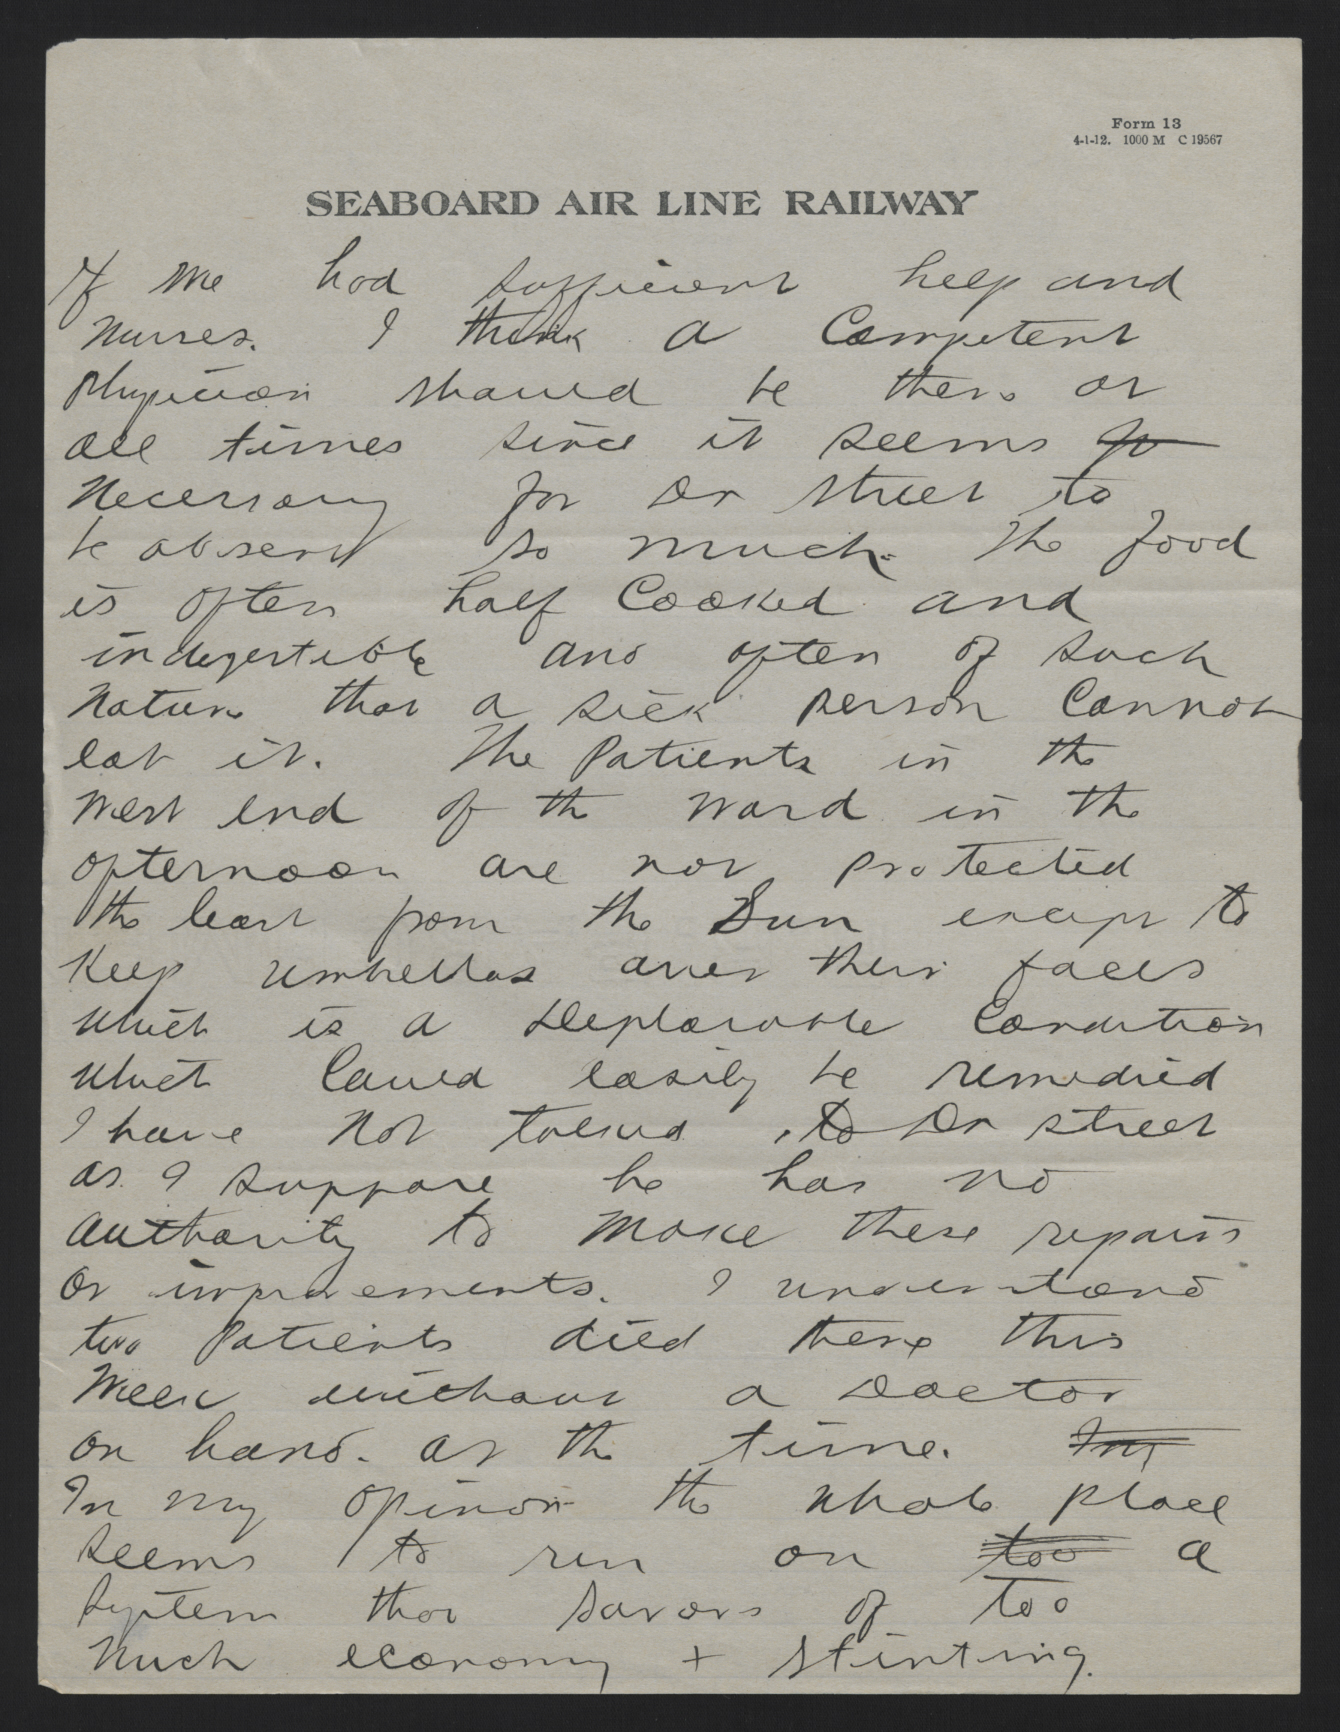 Letter from Carter to Craig, June 17, 1913, page 2